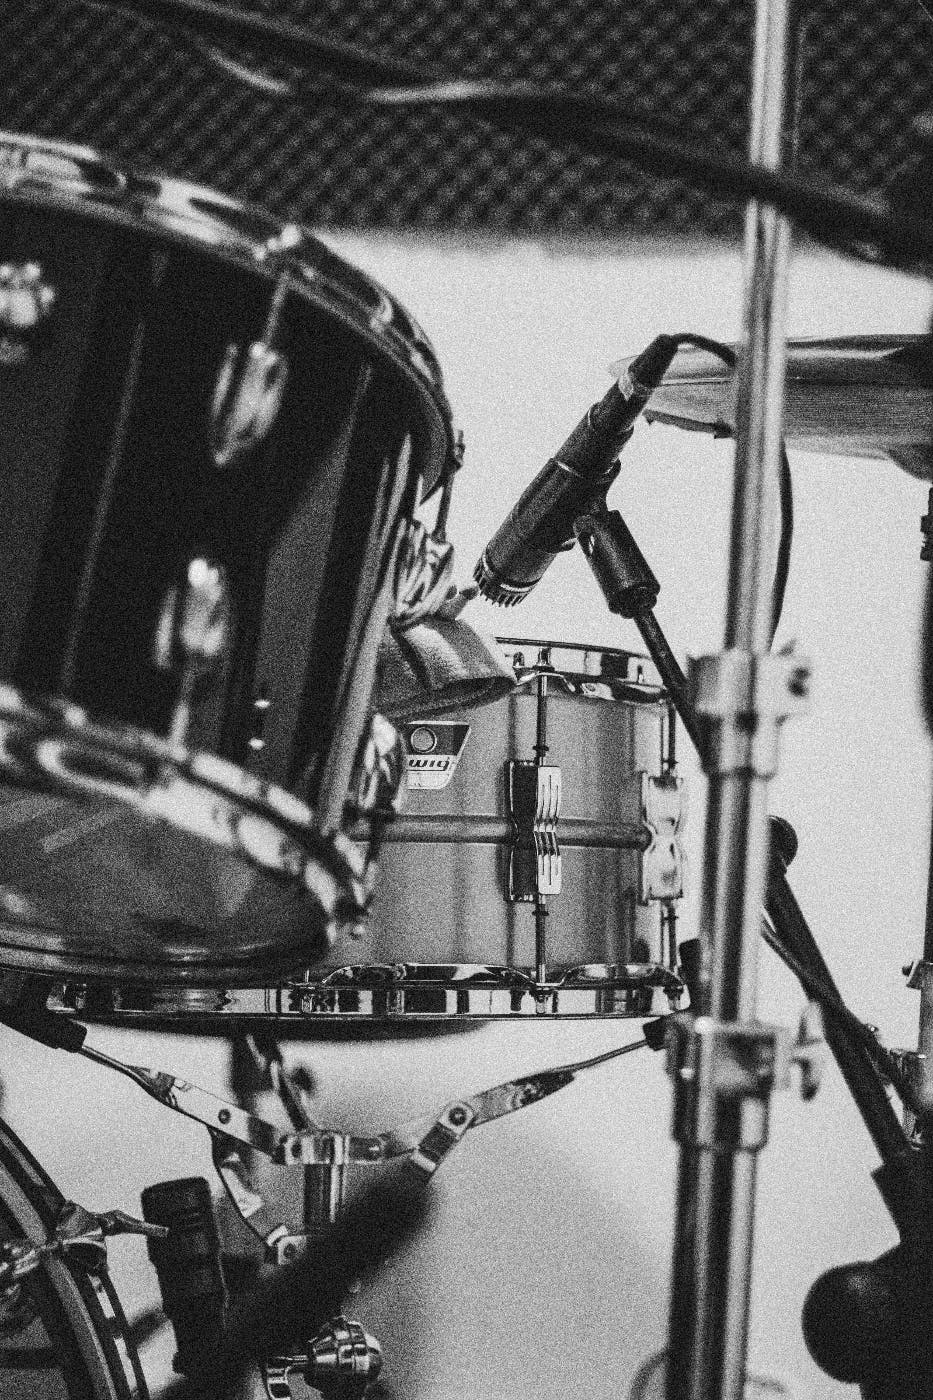 a close up of a drum kit, snare and tom